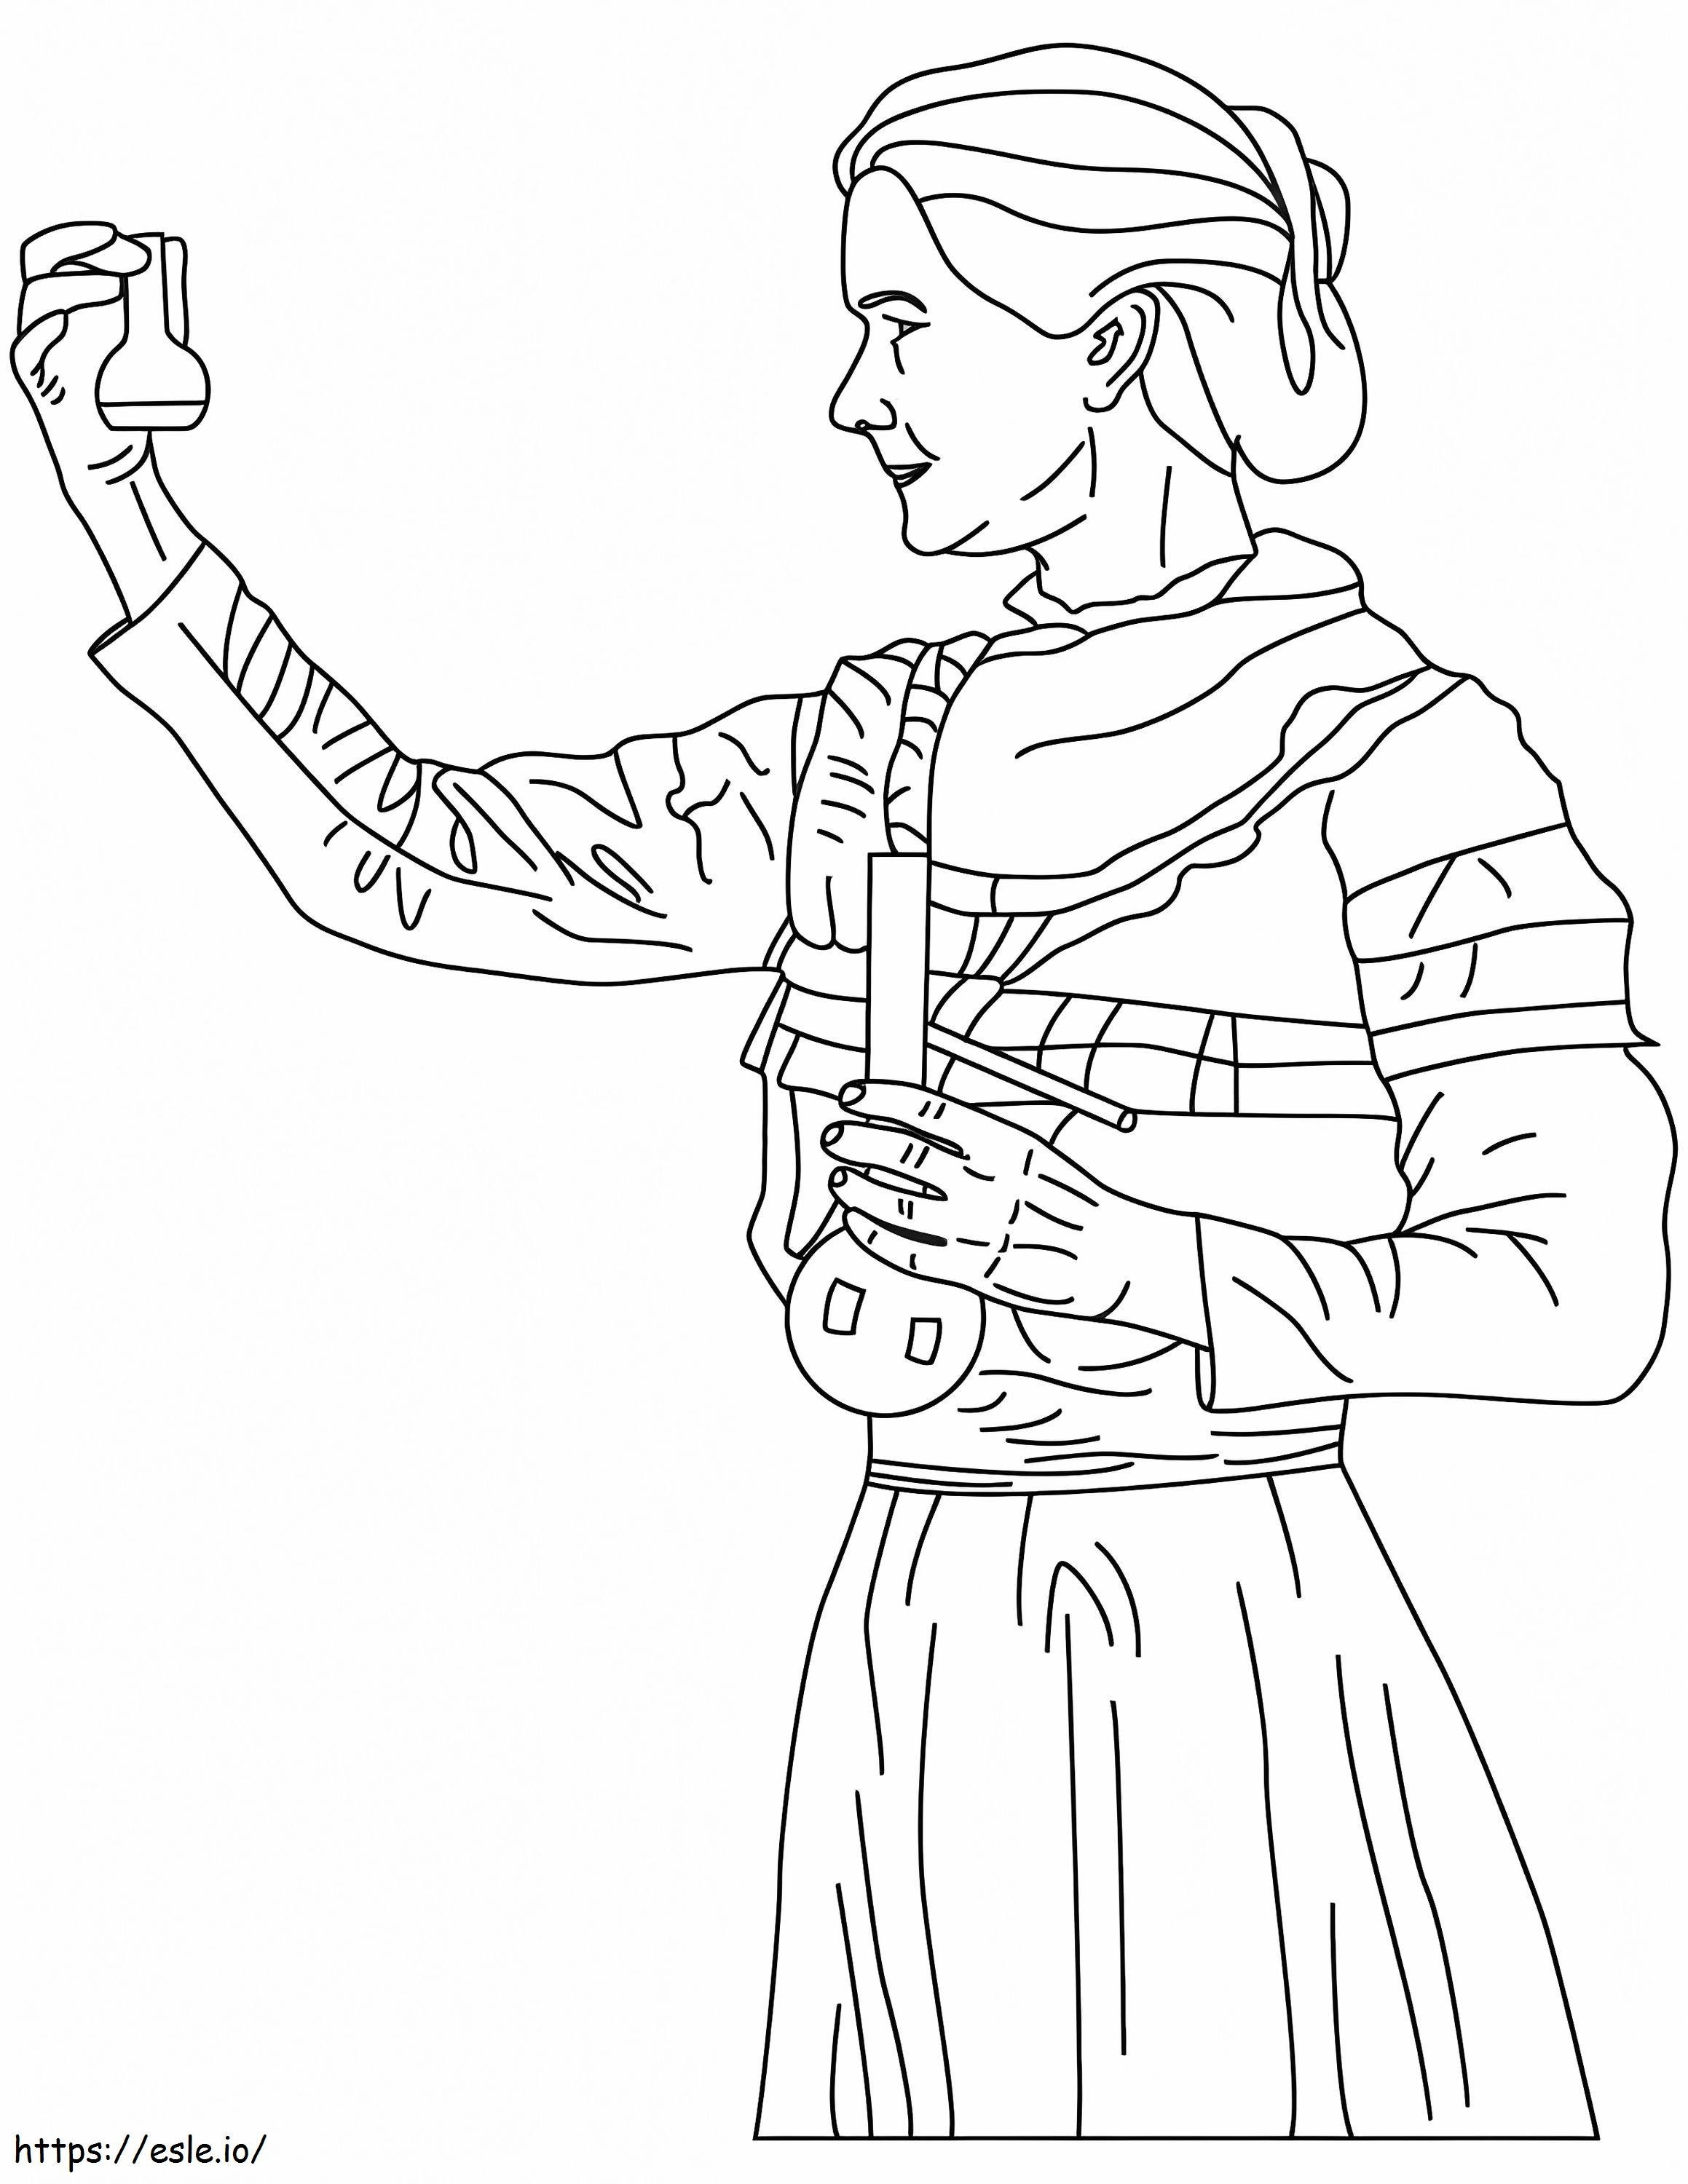 Marie Curie 1 coloring page